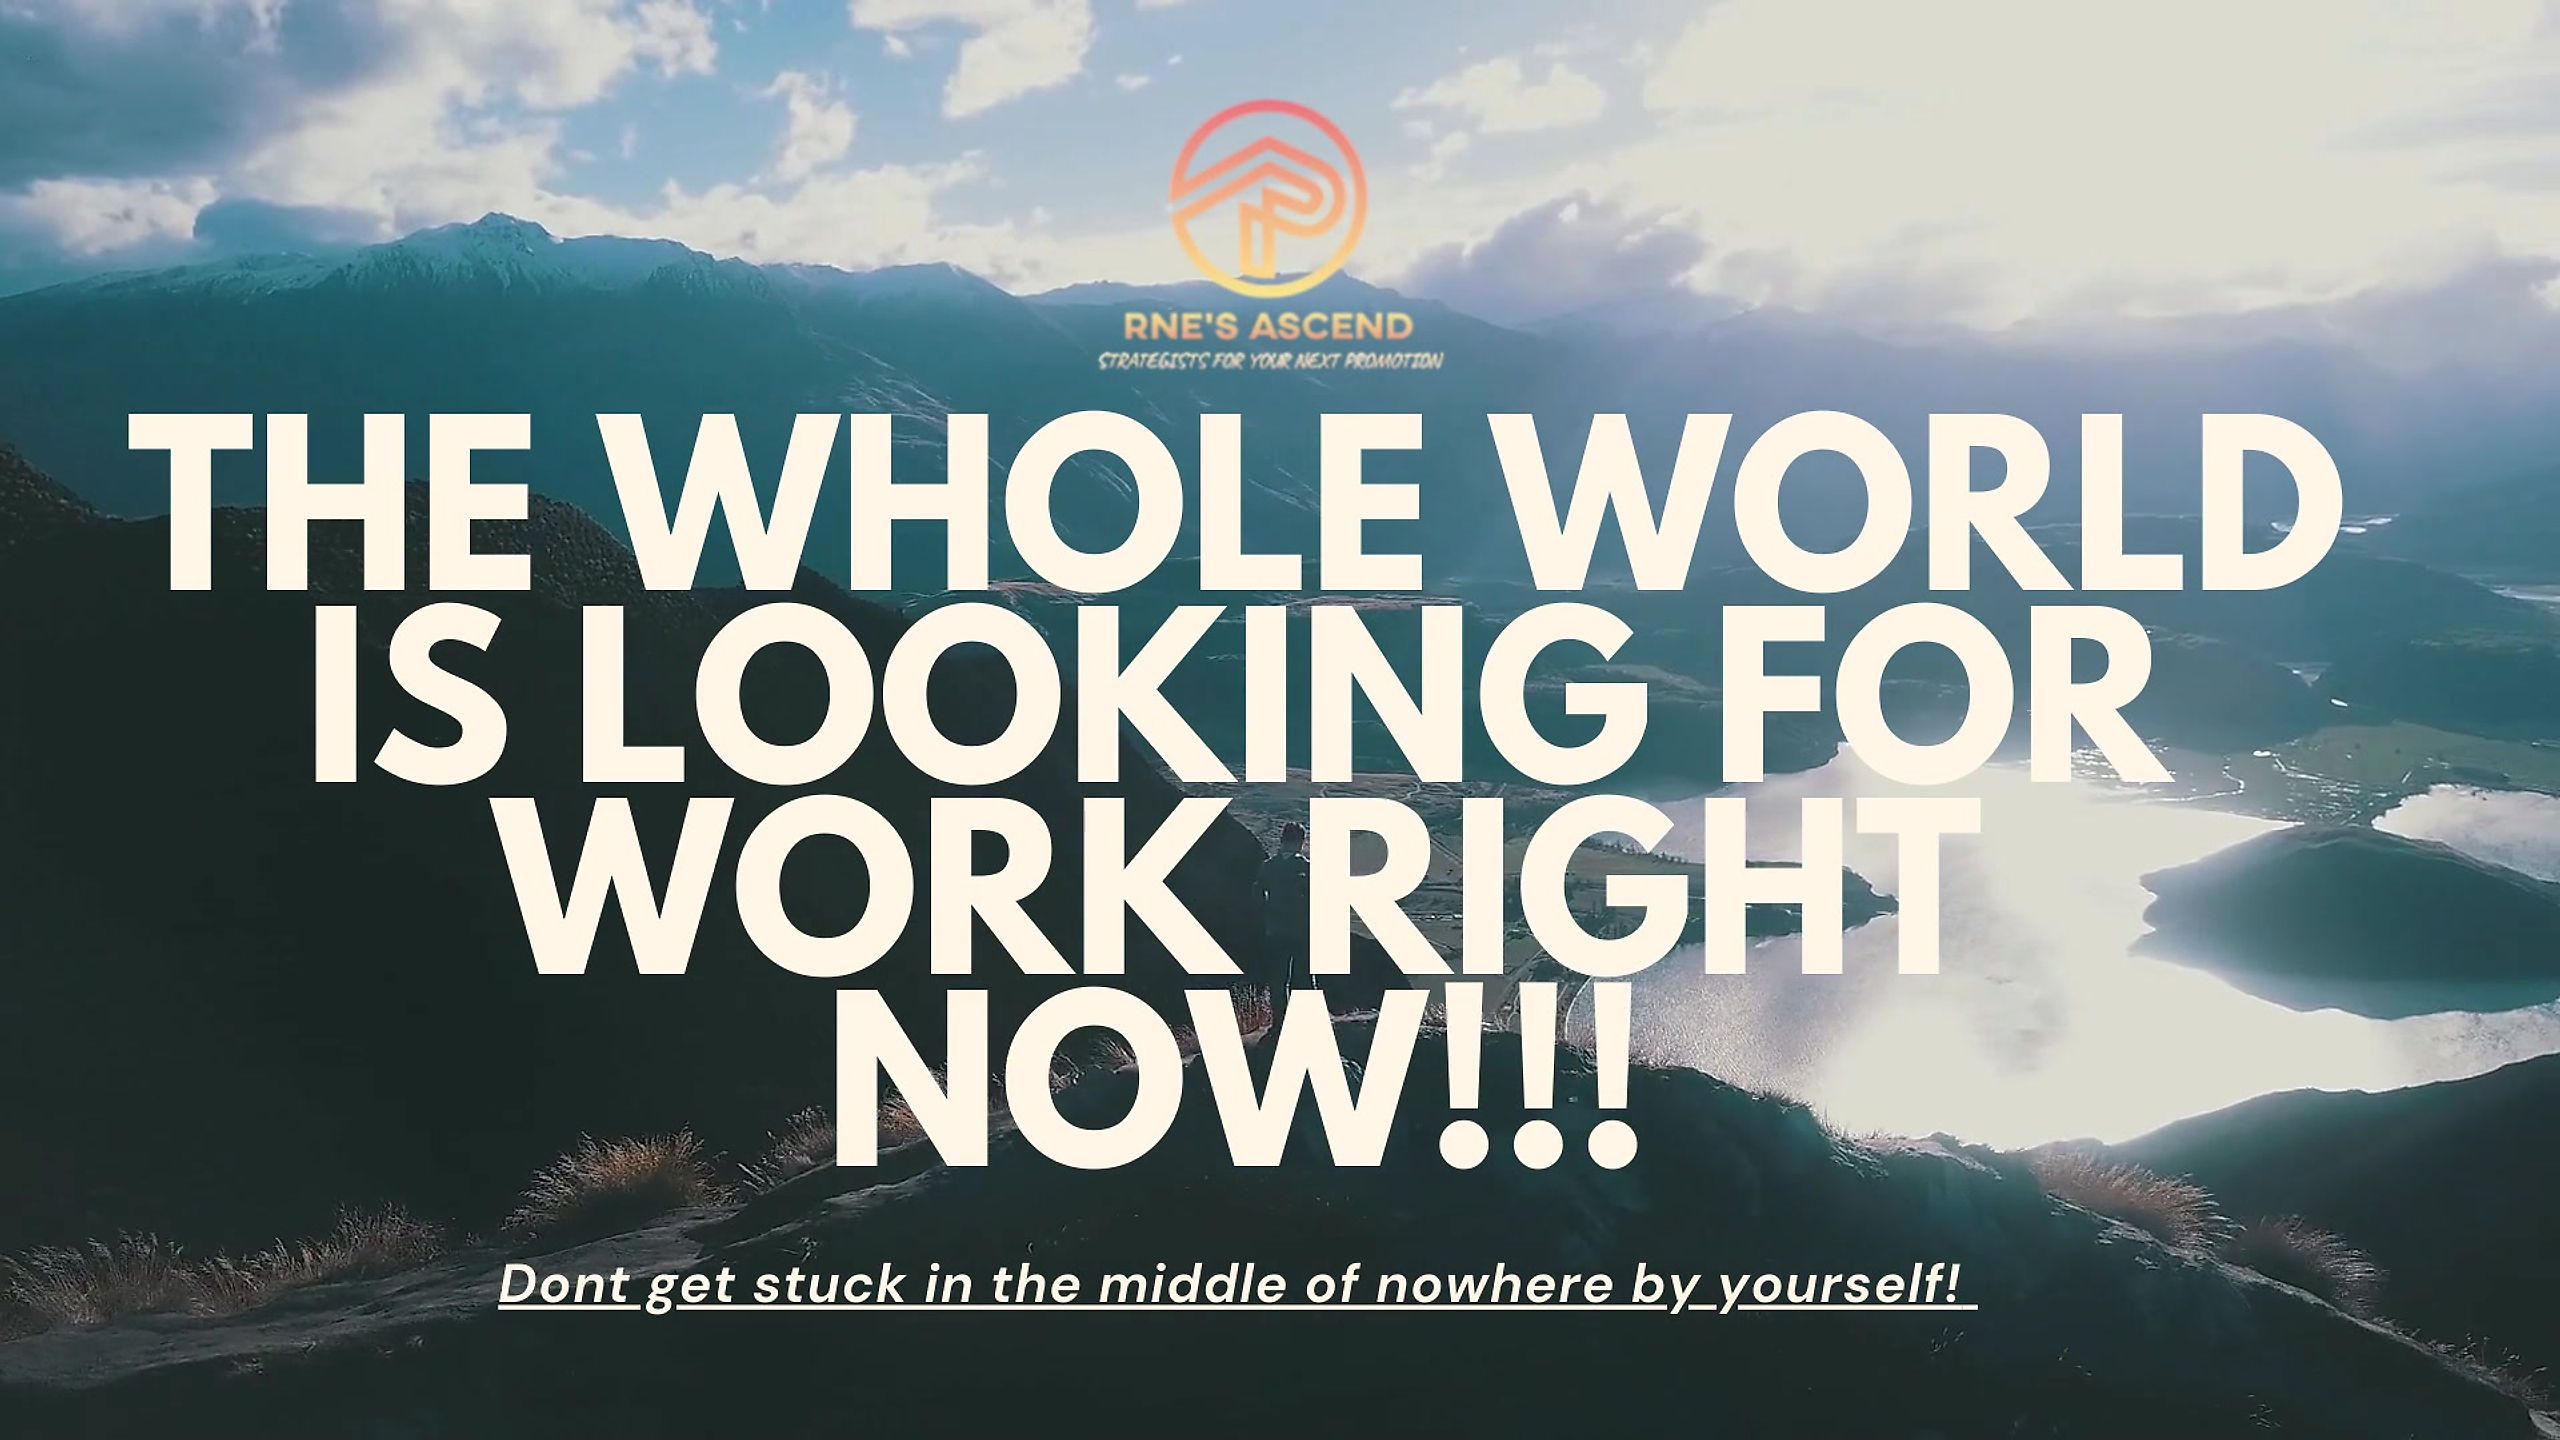 THE WHOLE WORLD IS LOOKING FOR WORK RIGHT NOW!!!